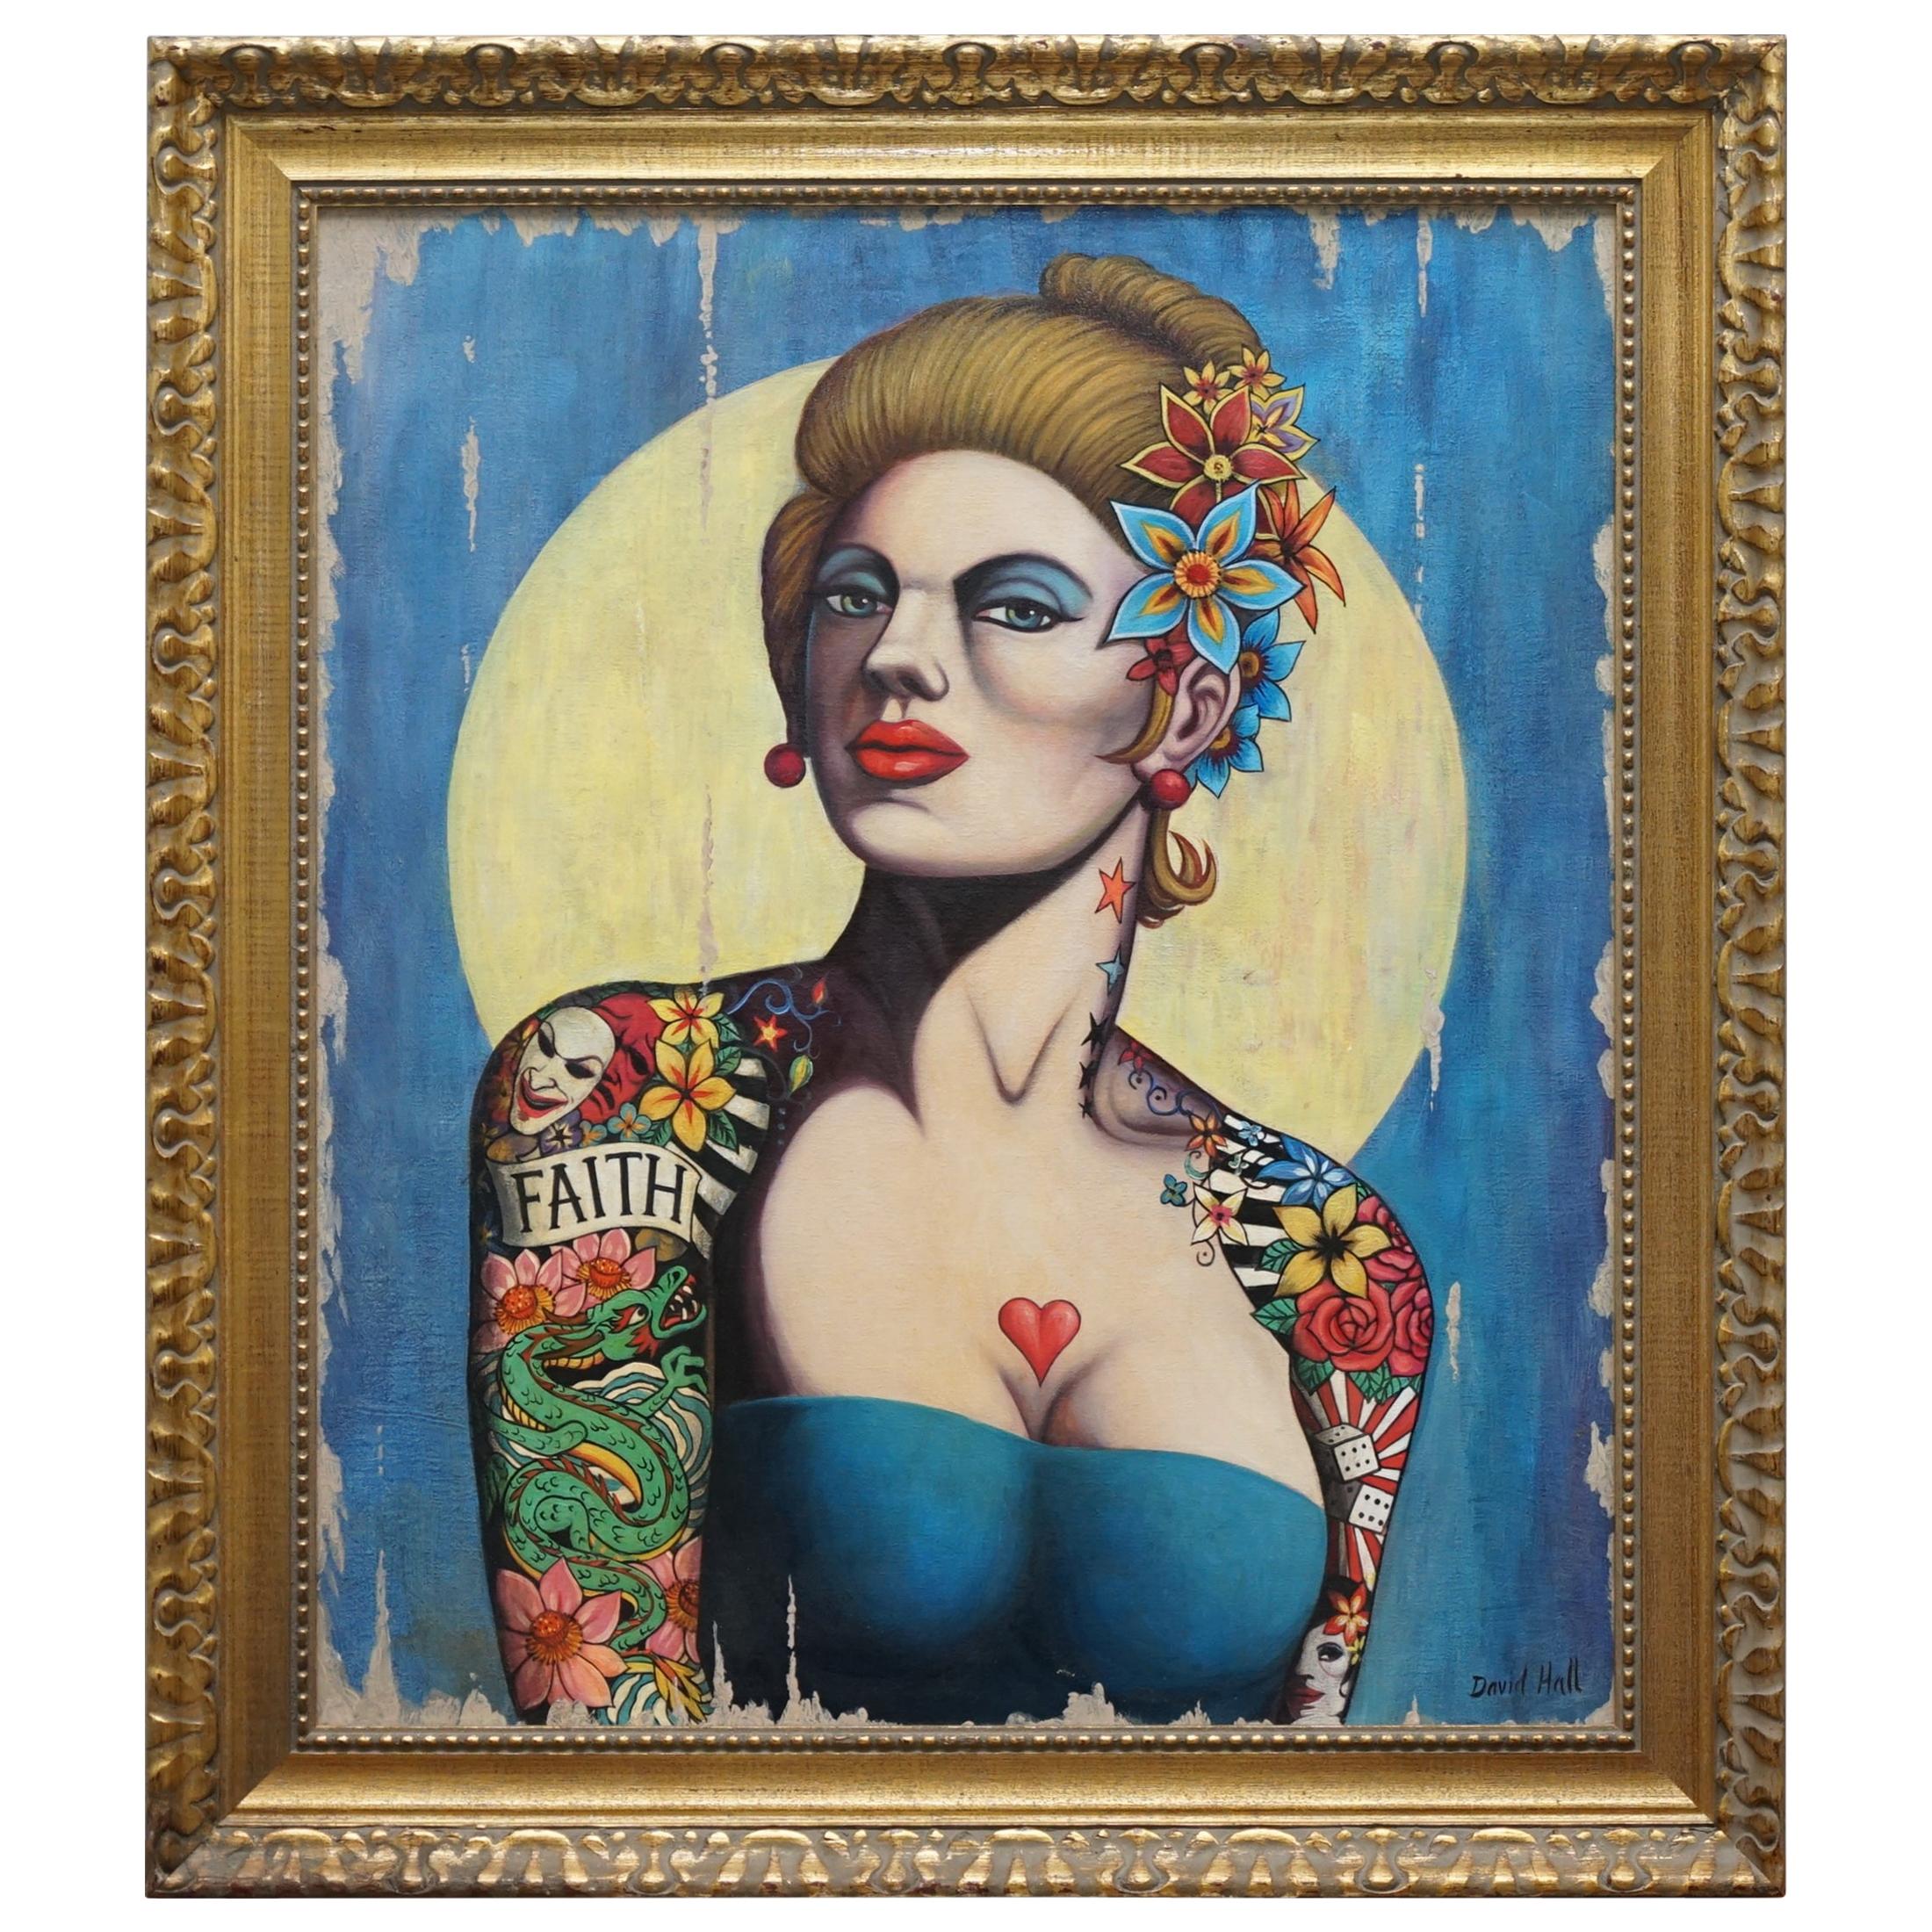 Sublime David Hall Oil on Boarding Painting of a Very Cool Heavily Tattooed Chic